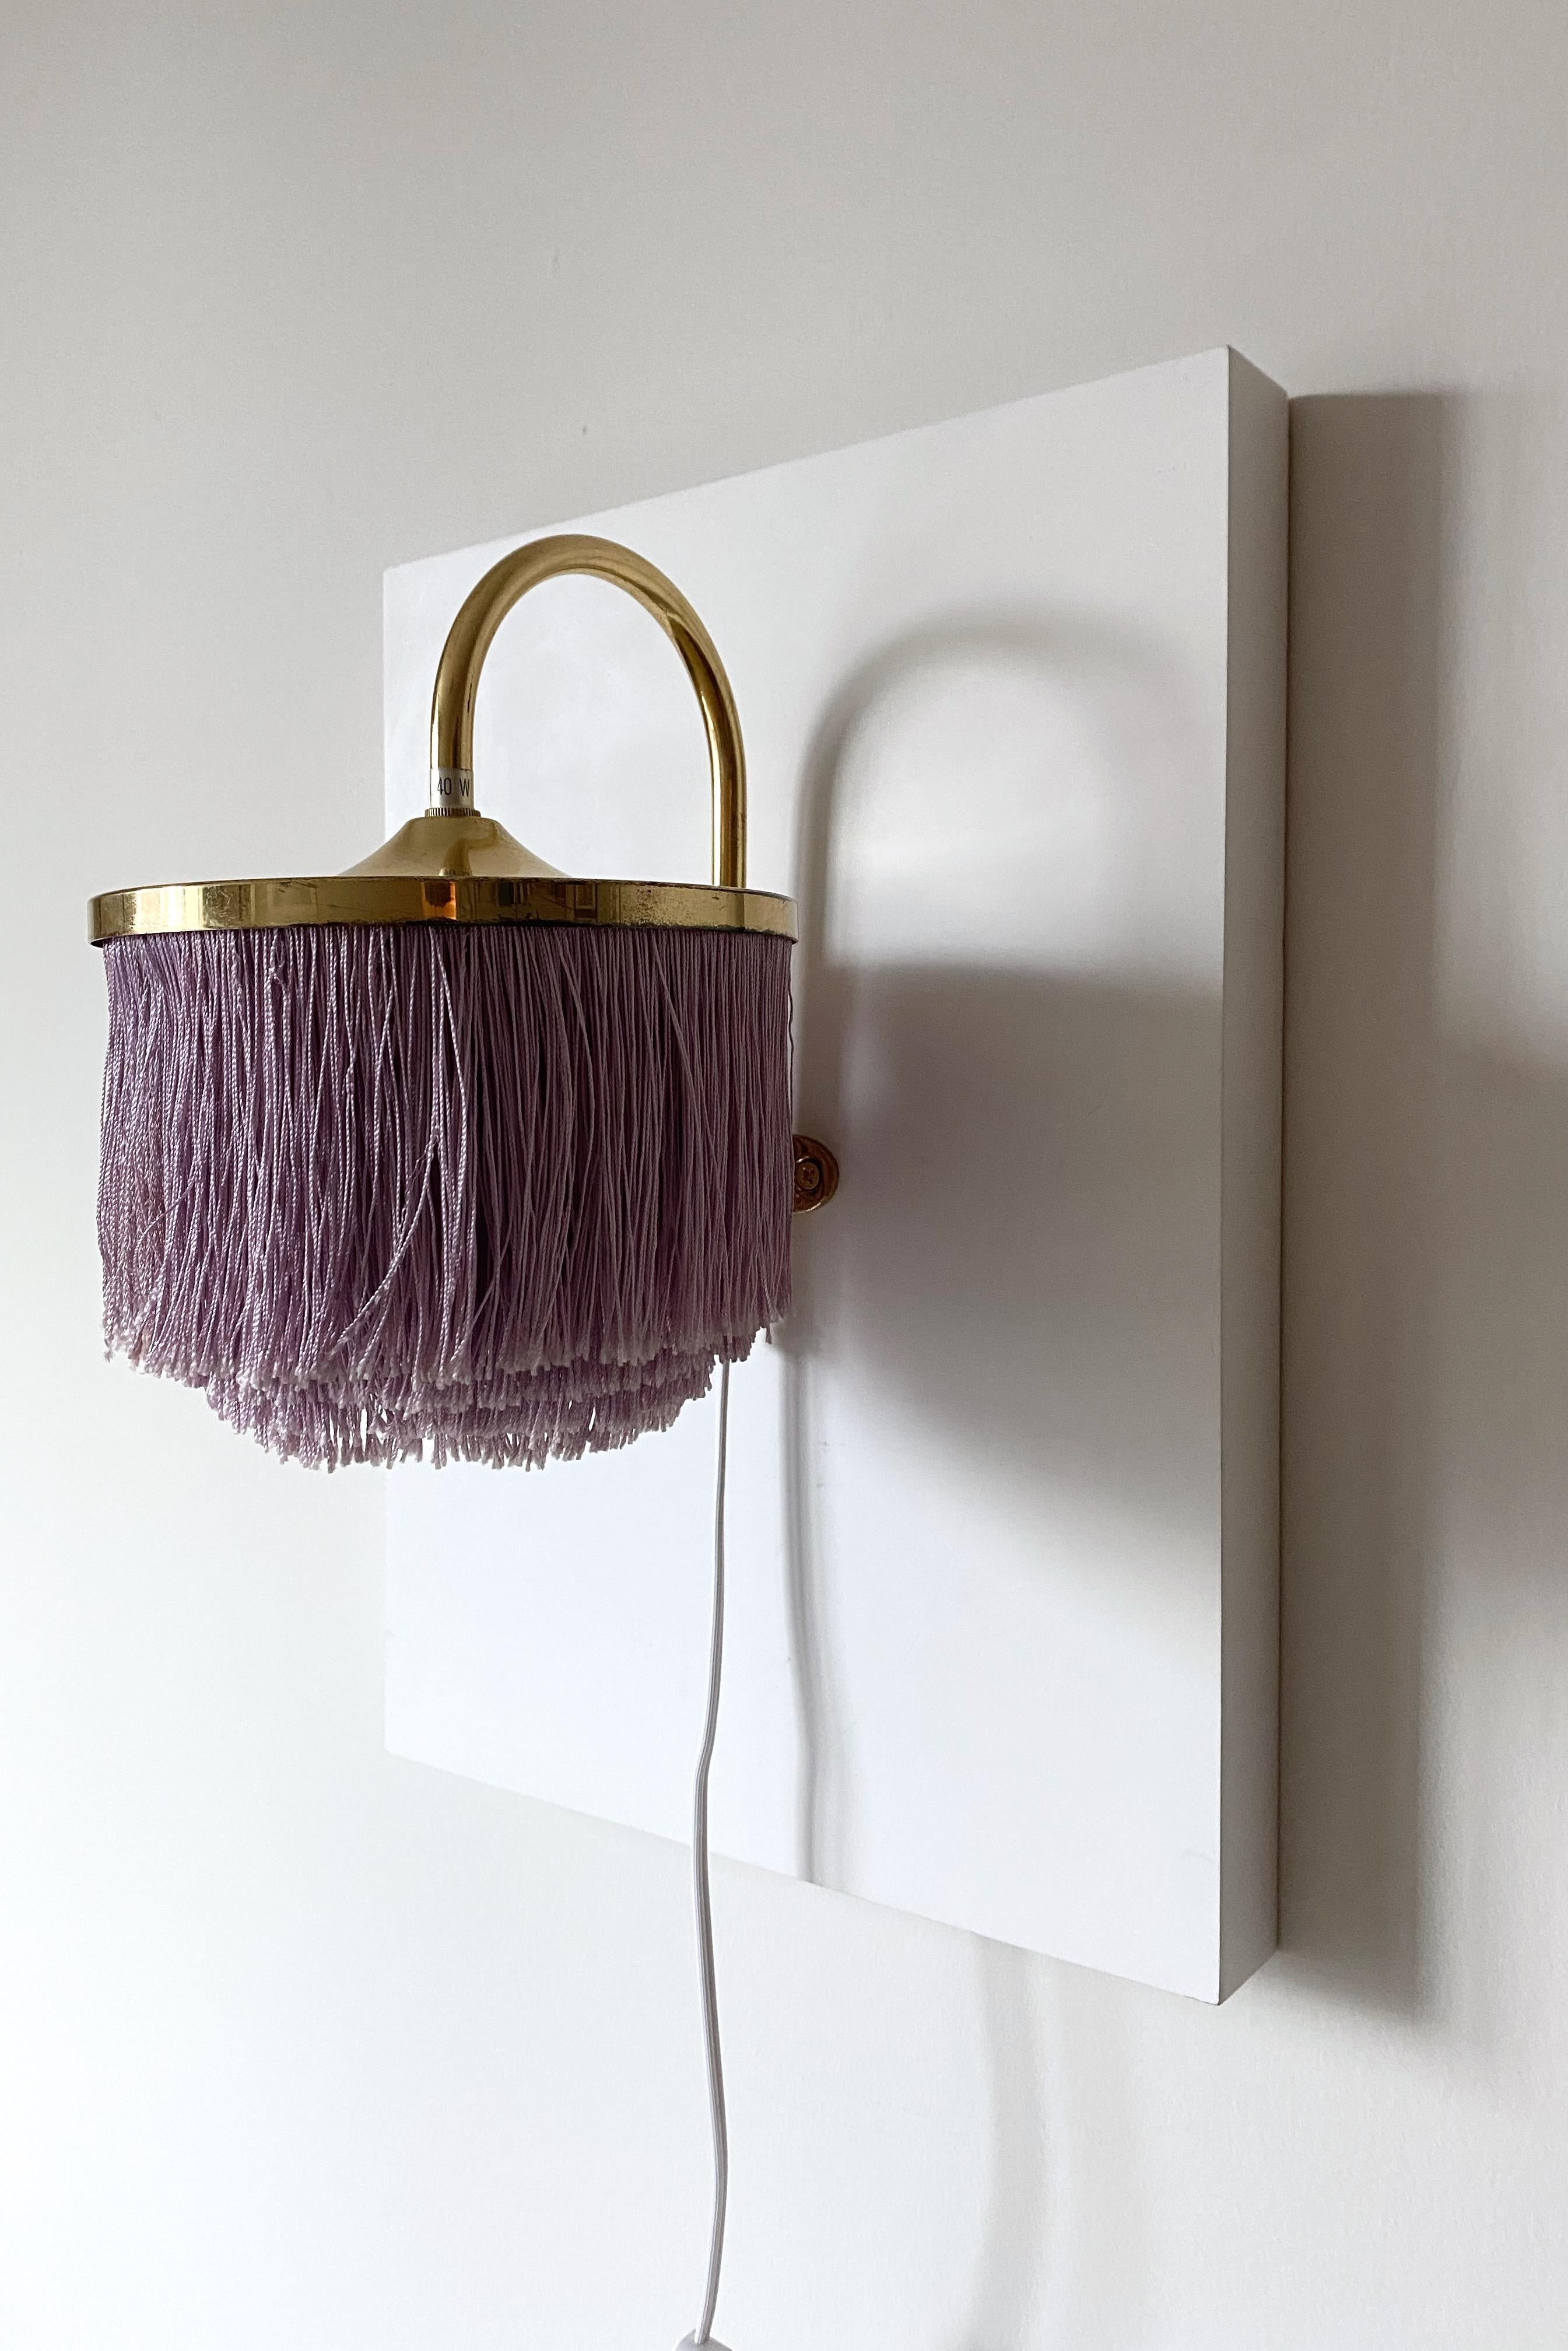 Vintage Wall light modell V271 by Hans-Agne Jakobsson. Part of Hans-Agne Jakobsson now iconic fringe lamp collection this piece has light purple colored silk fringes and brass lamp arm. It is a super charming wall light that will bright up any